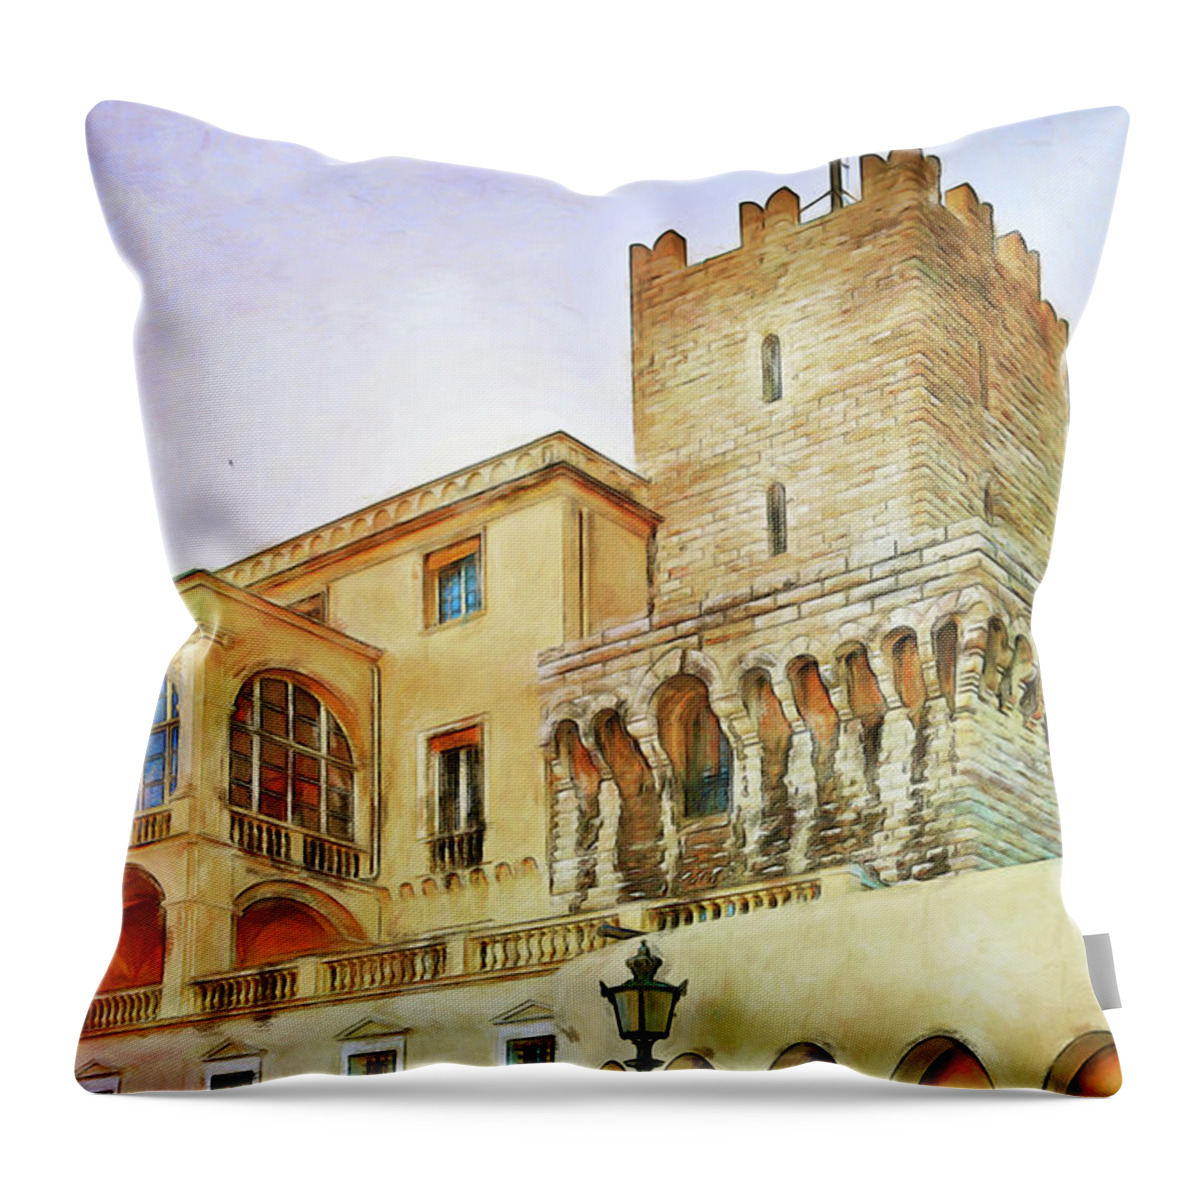 Royal Palace Throw Pillow featuring the photograph Royal Palace, Monaco Monte Carlo by Tatiana Travelways